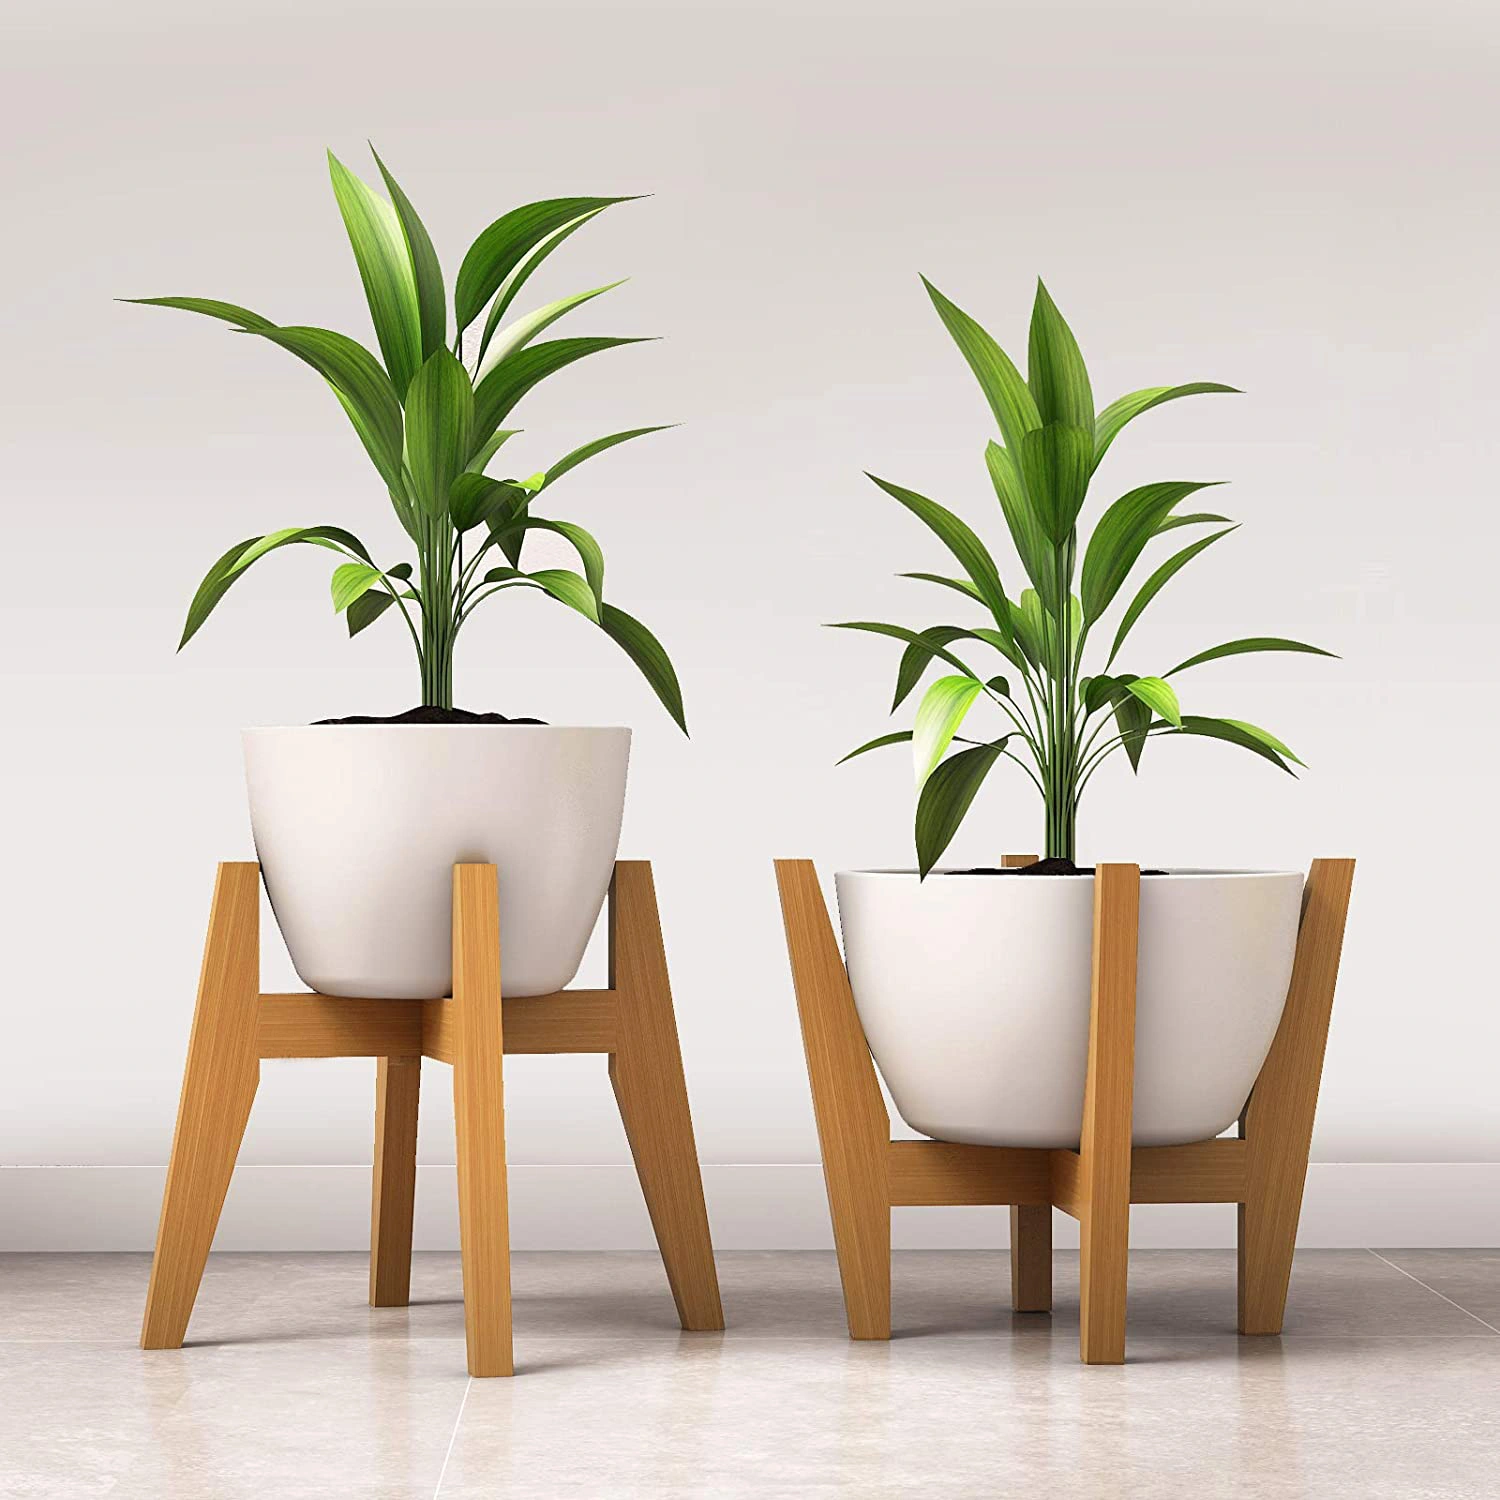 Adjustable Bamboo Flower Holder Plant Stand For Home